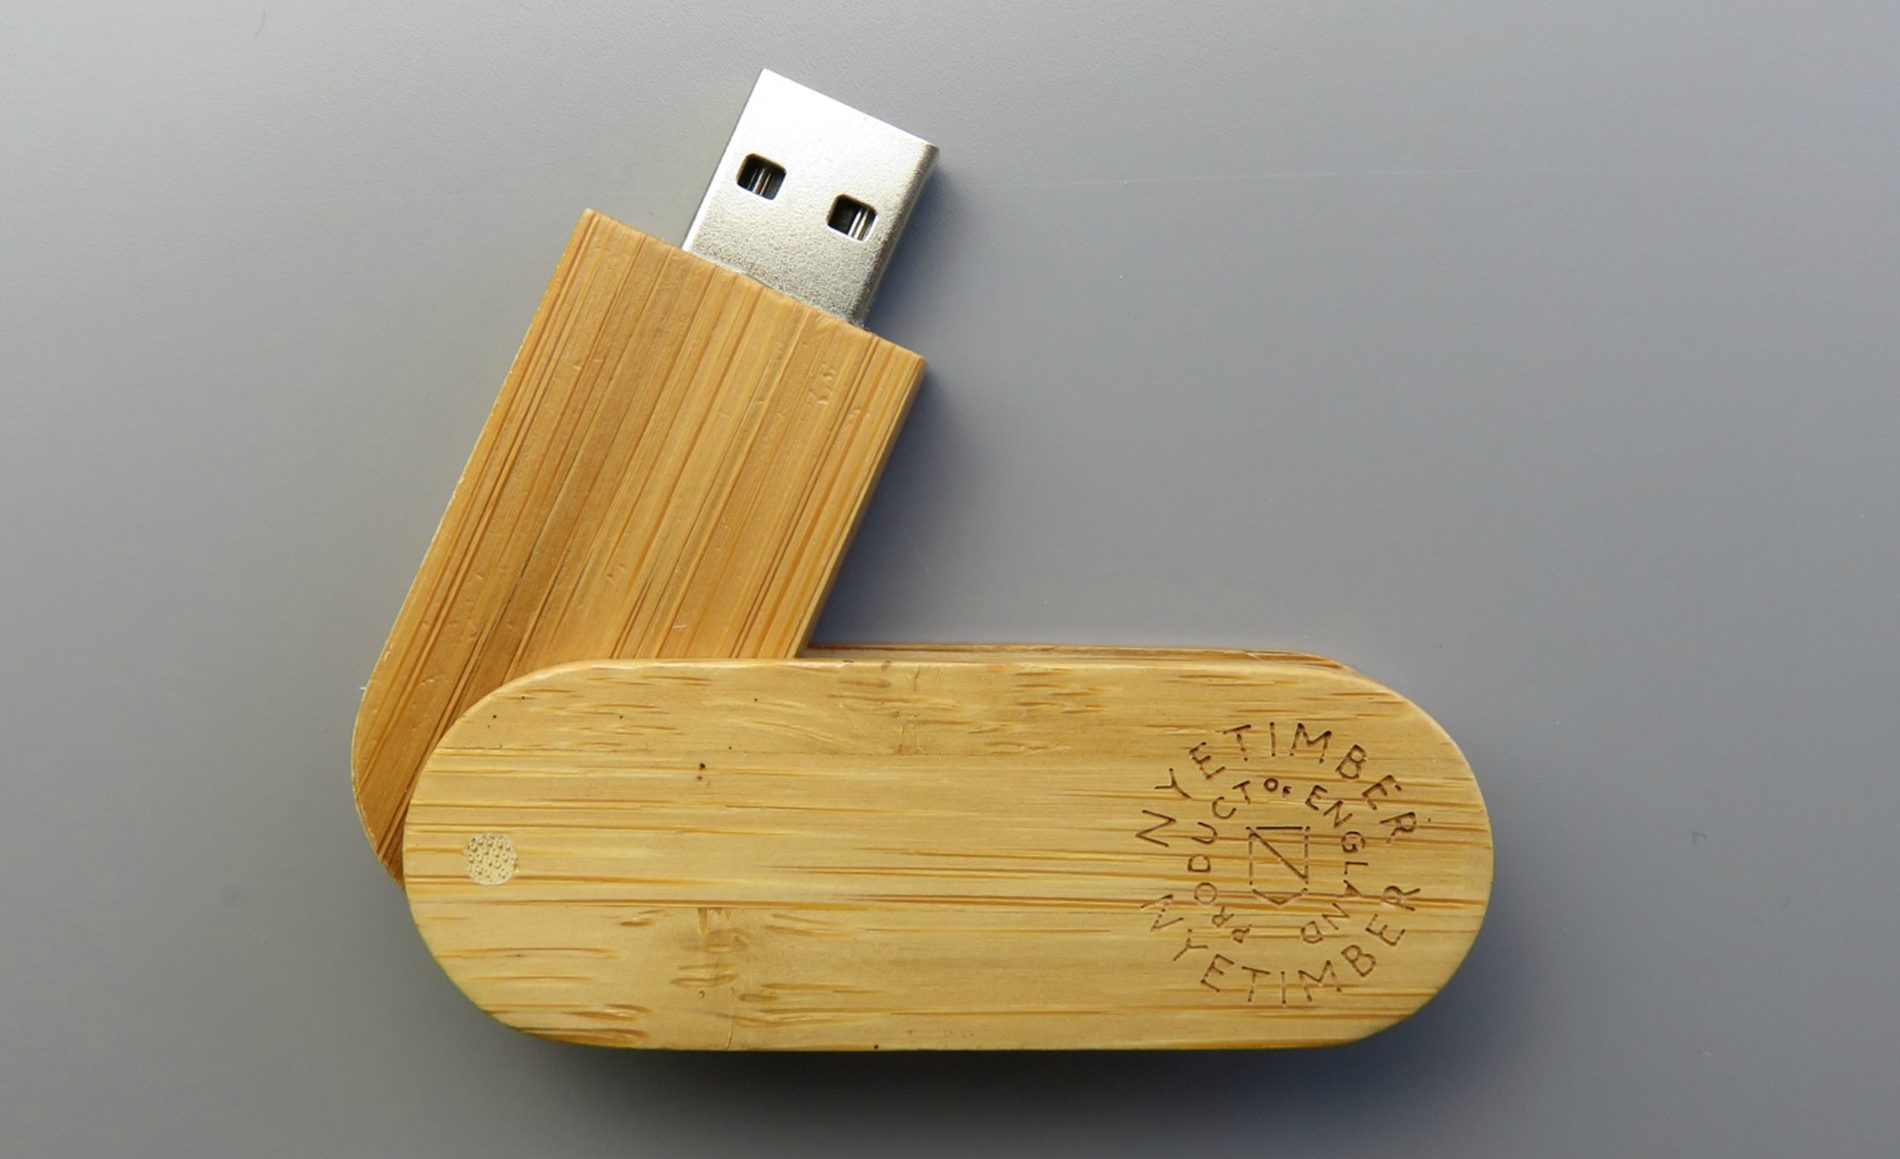 Wooden USB with NyeTimber engraved logo on grey background